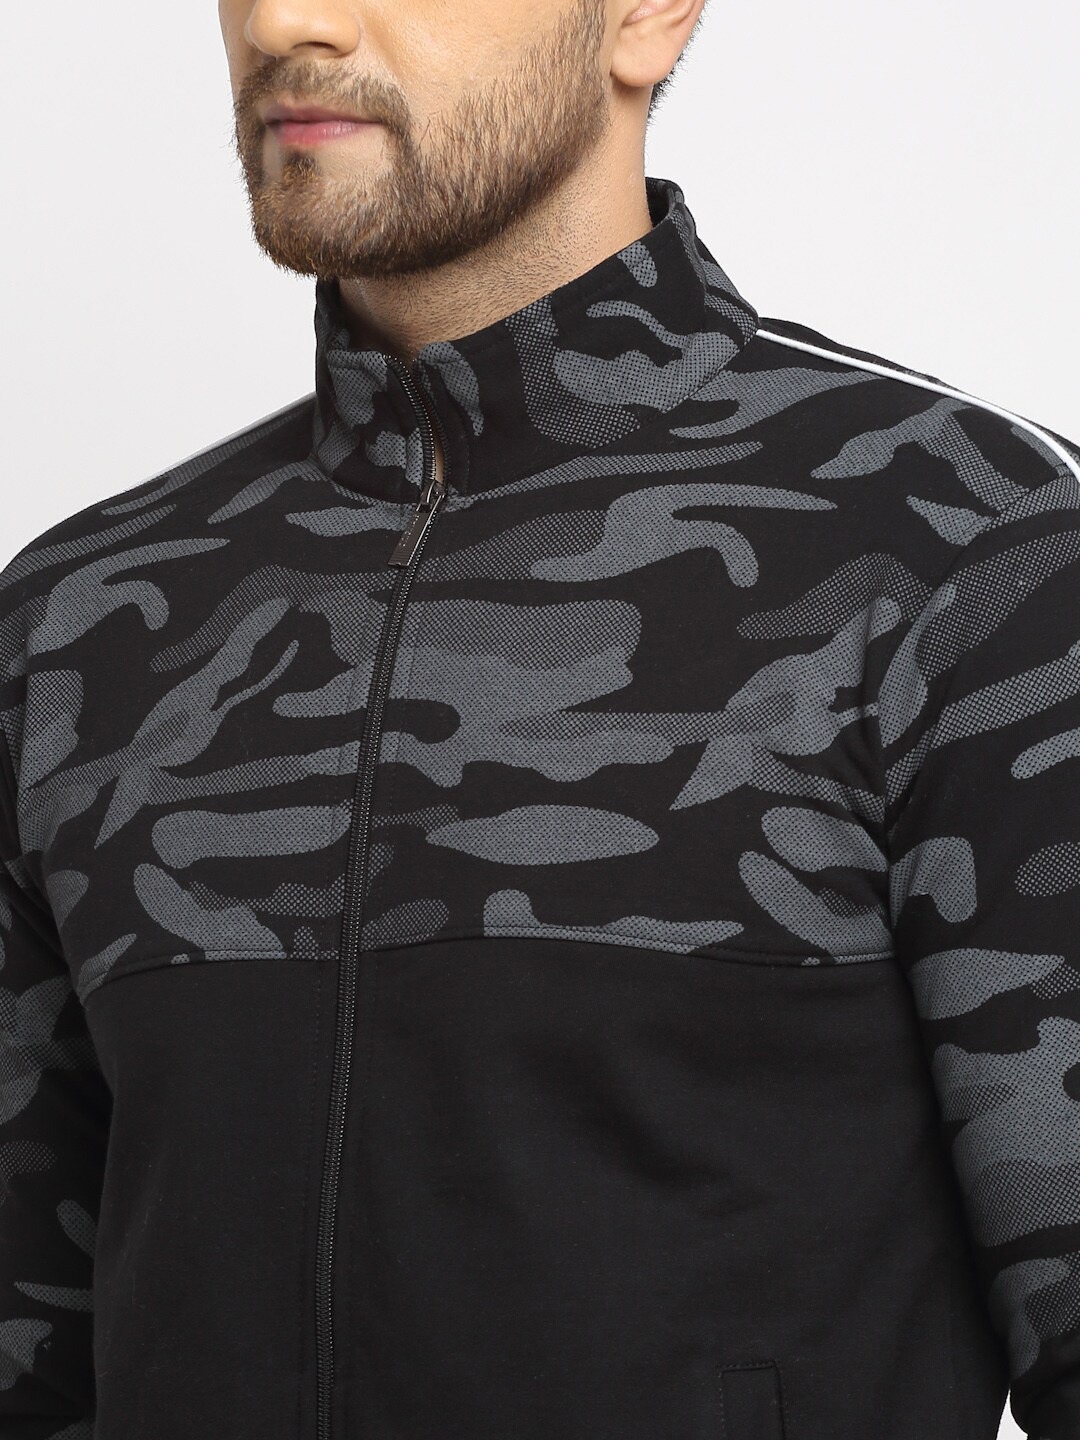 Clothing Tracksuits | Wild West Black & Grey Camouflage Printed Tracksuit - YW21822